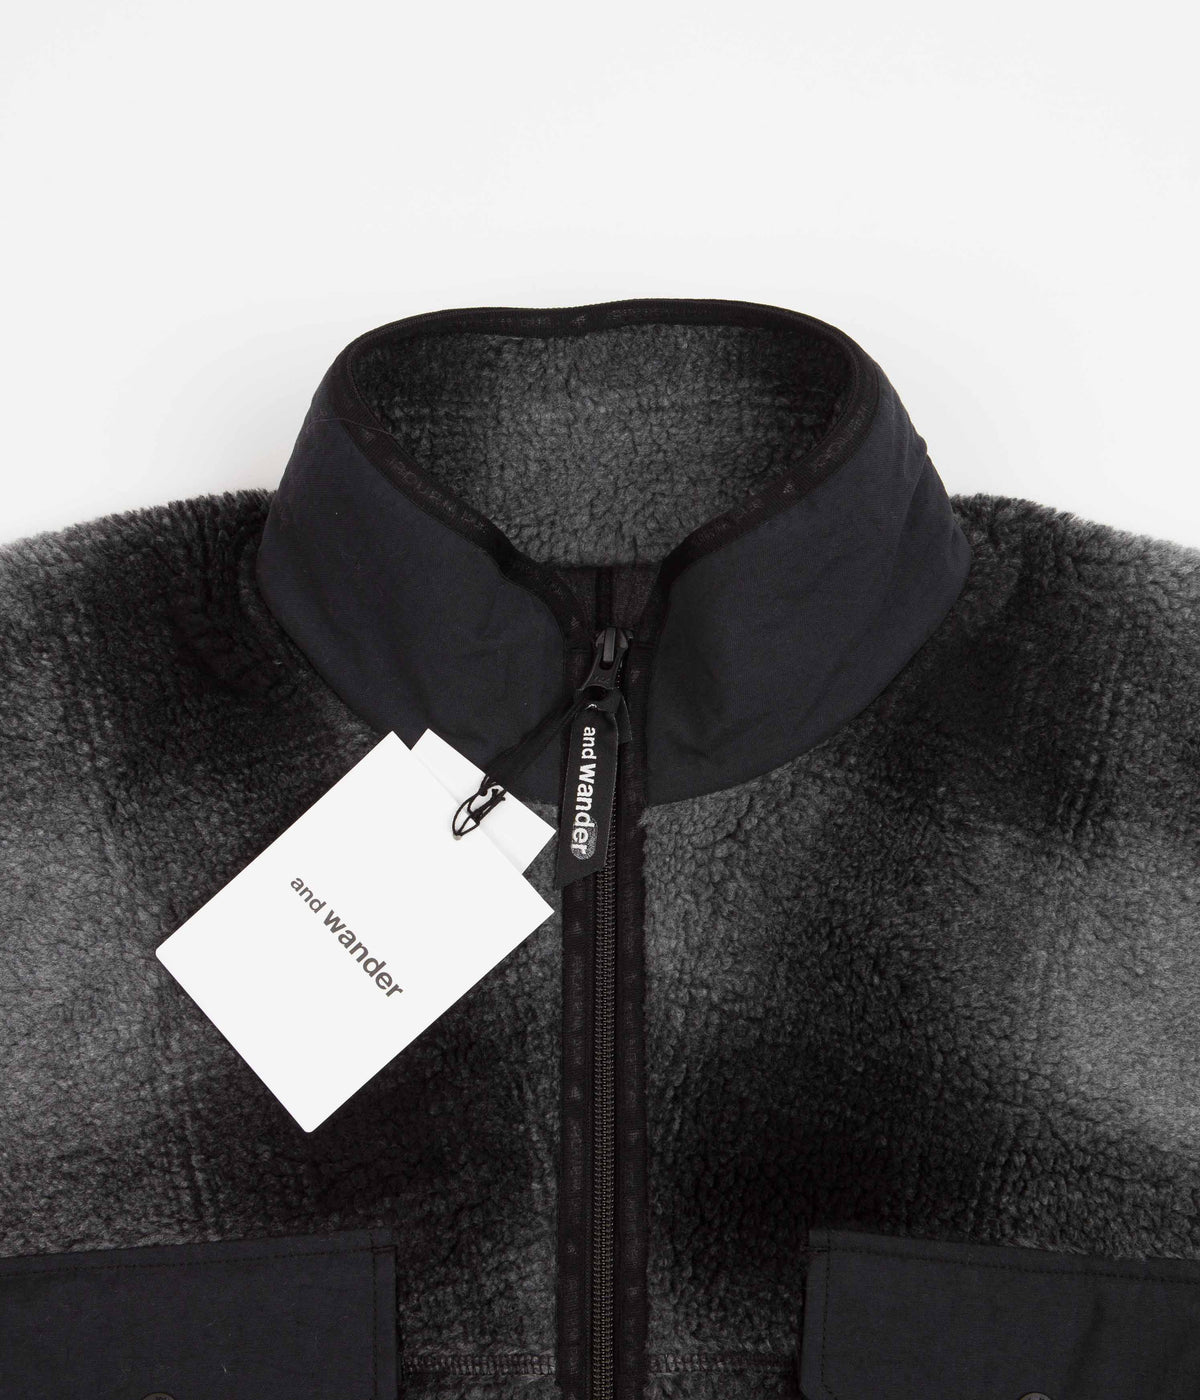 and wander Check Boa Jacket - Black | Always in Colour